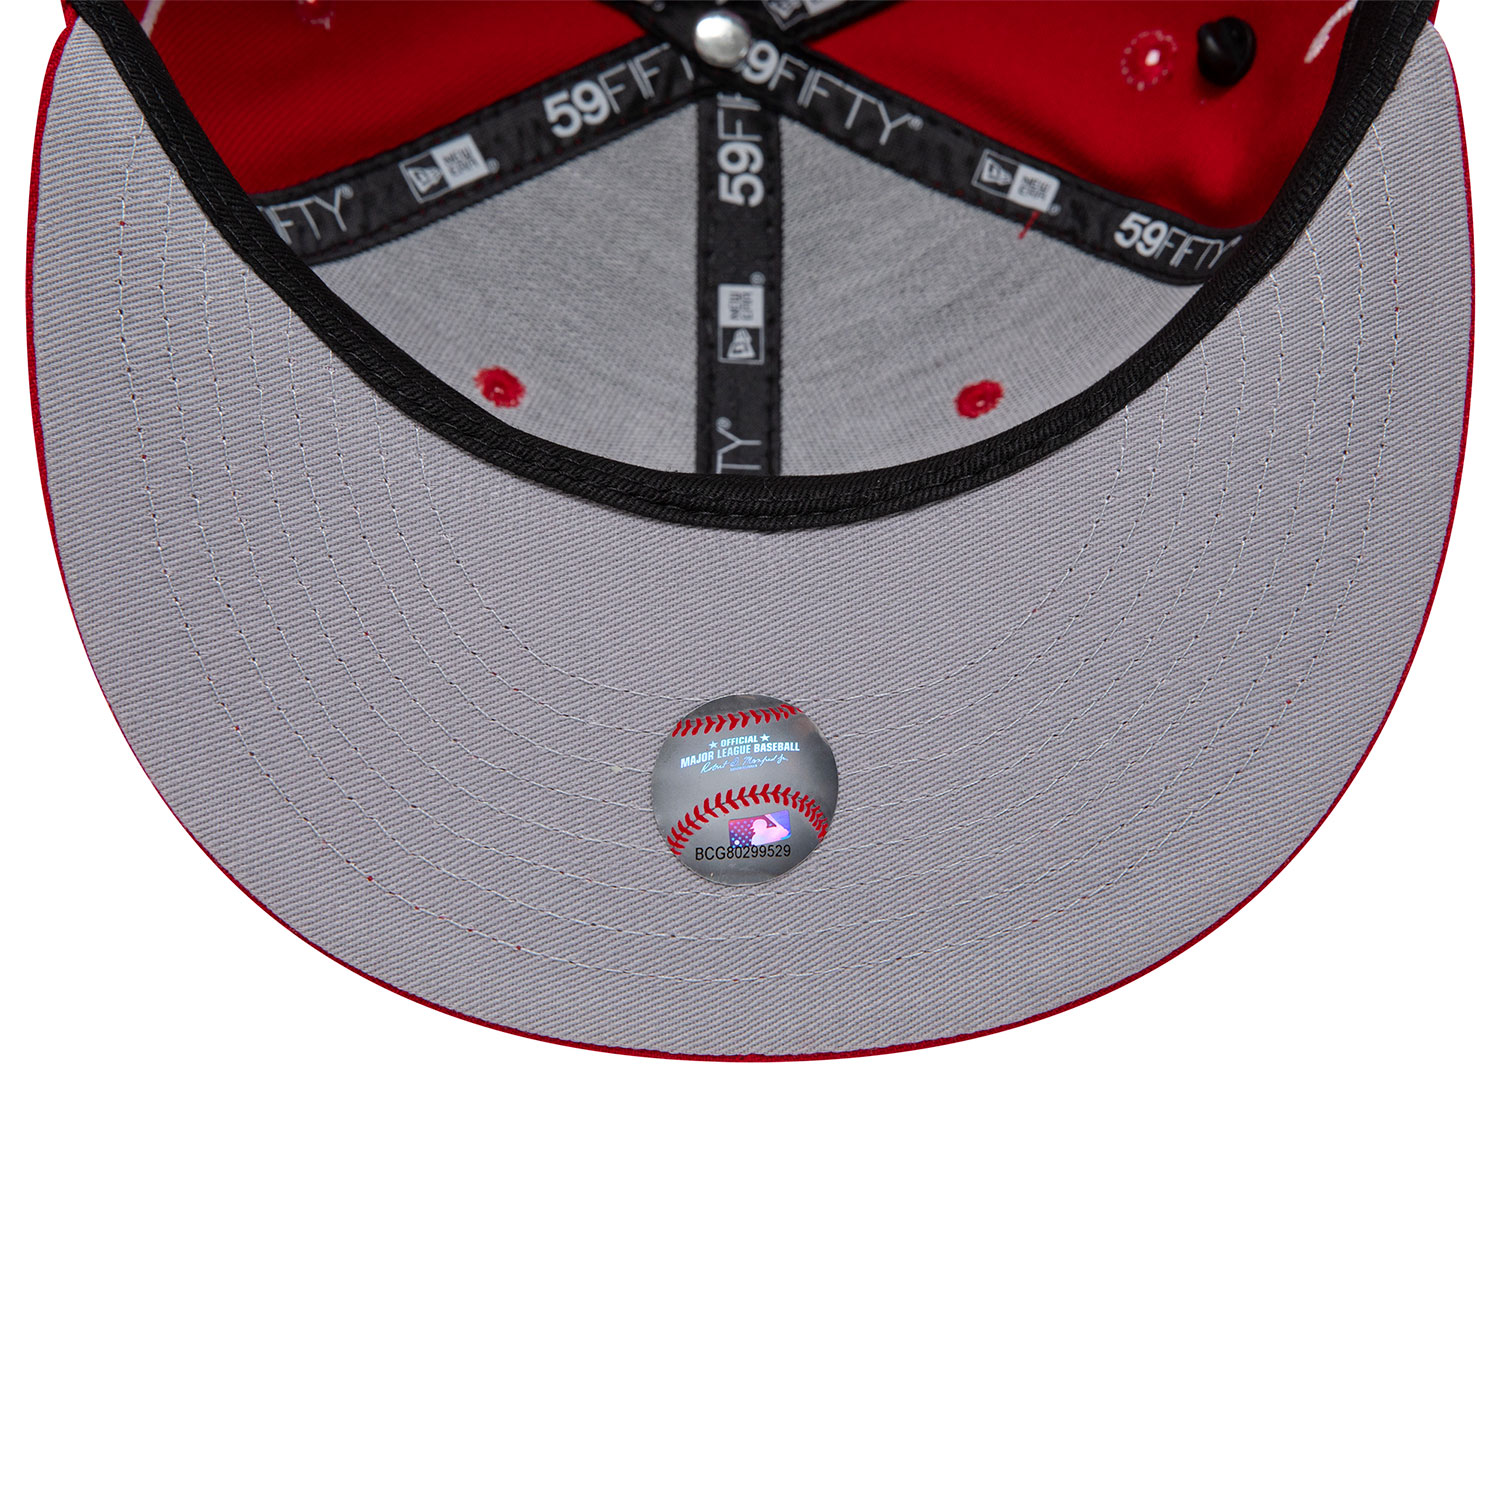 Tampa Bay Buccaneers New Era Historic Champs 59FIFTY Fitted Hat - Scarlet